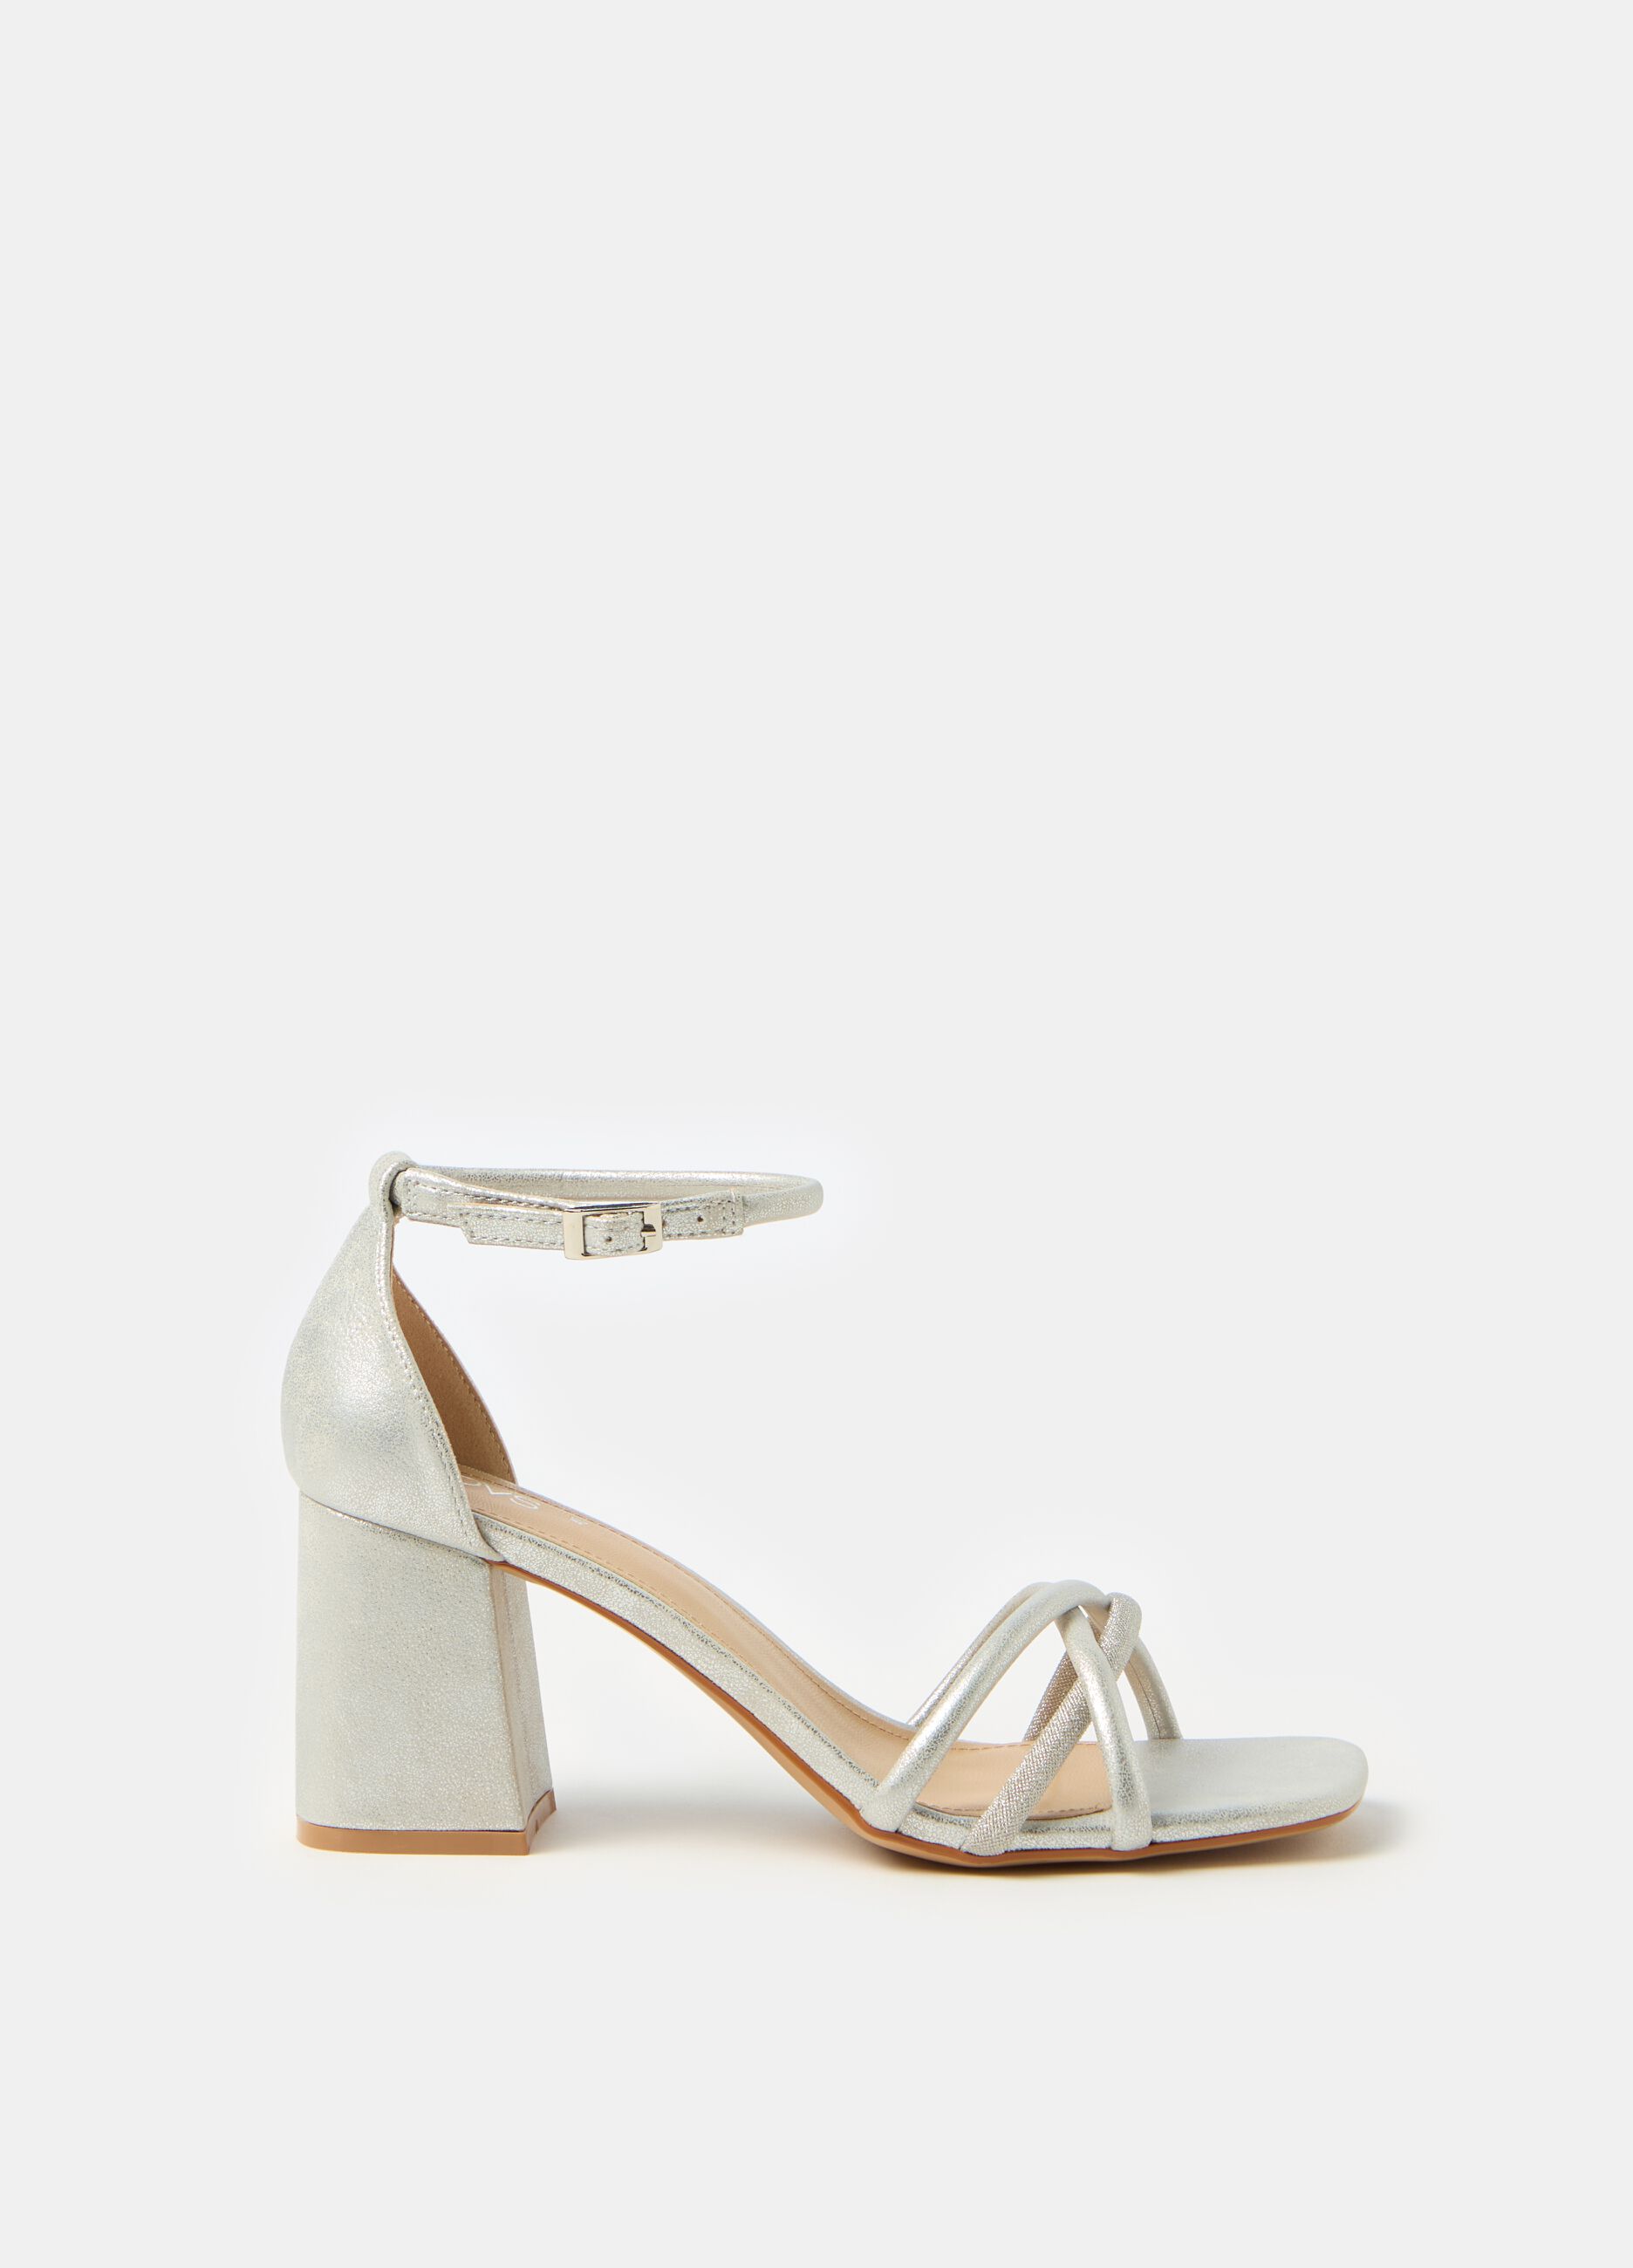 Silver sandals with criss-cross straps